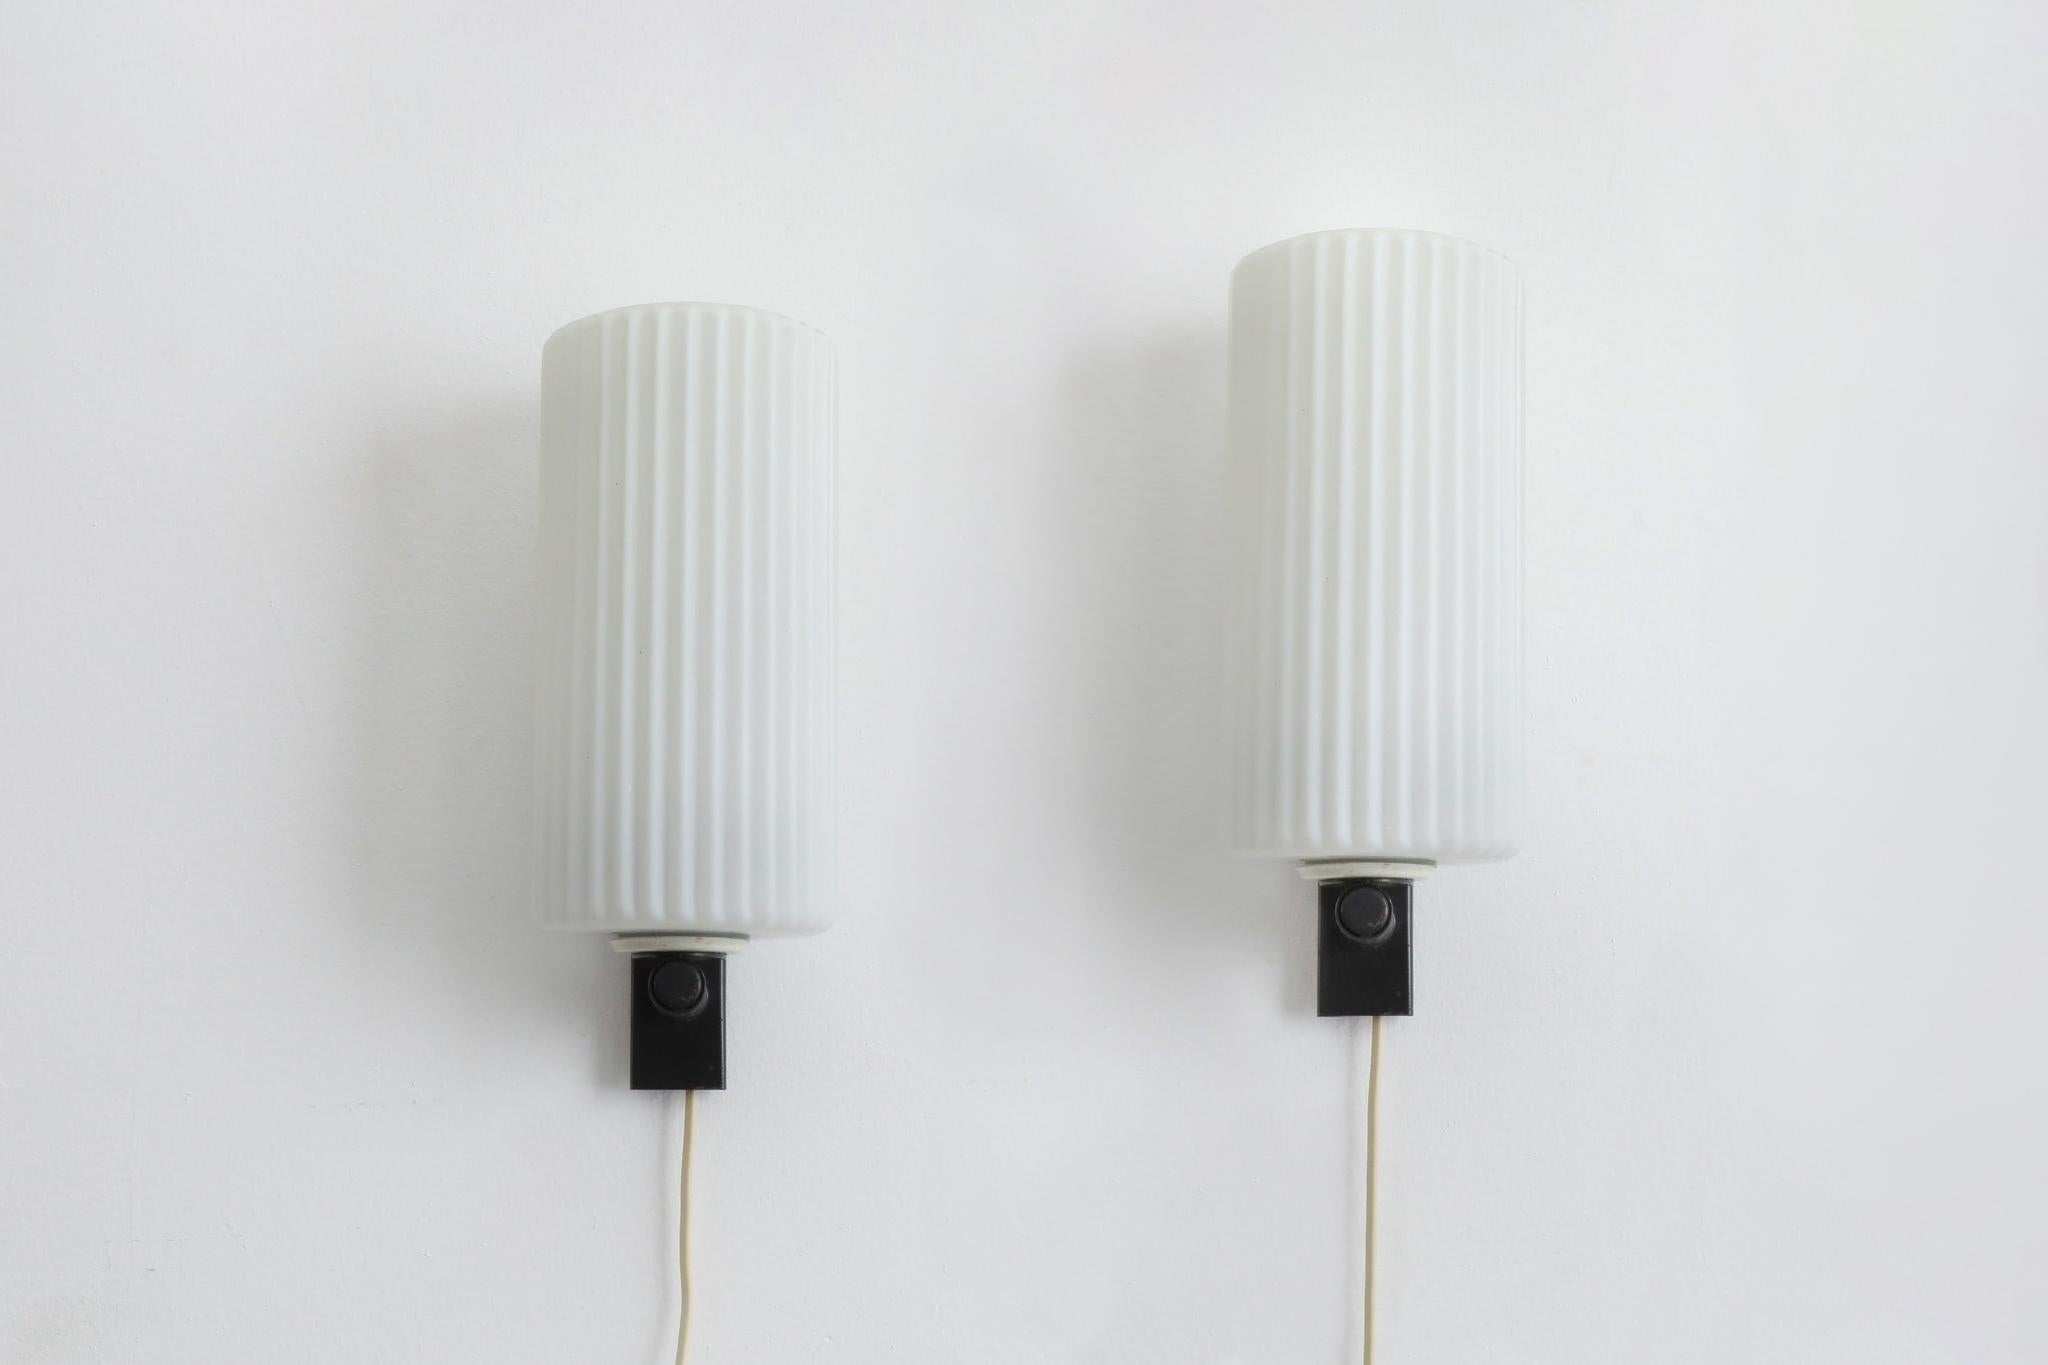 Pair of vintage, Mid-Century, wall mounted milk glass sconces by Dutch manufacturer Philips. Lights have a black enameled metal base that seats ribbed milk glass cylinder shades. Both sconces are in original condition with some visible wear